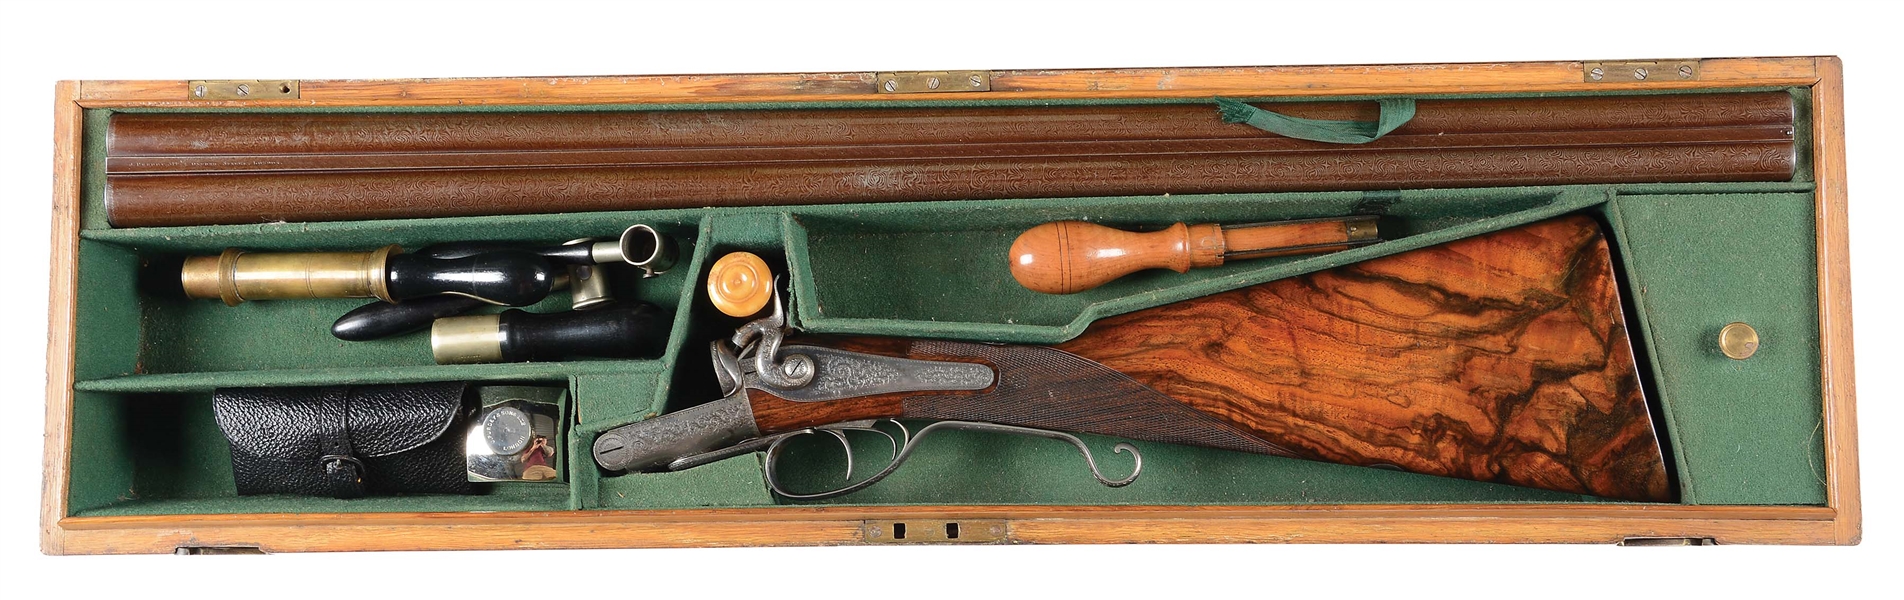 (A) ATTRACTIVE HIGH CONDITION JAMES PURDEY HAMMER SIDE BY SIDE SHOTGUN INCORPORATING UNUSUAL LONG GUARD LEVER WITH CASE AND ACCESSORIES.  